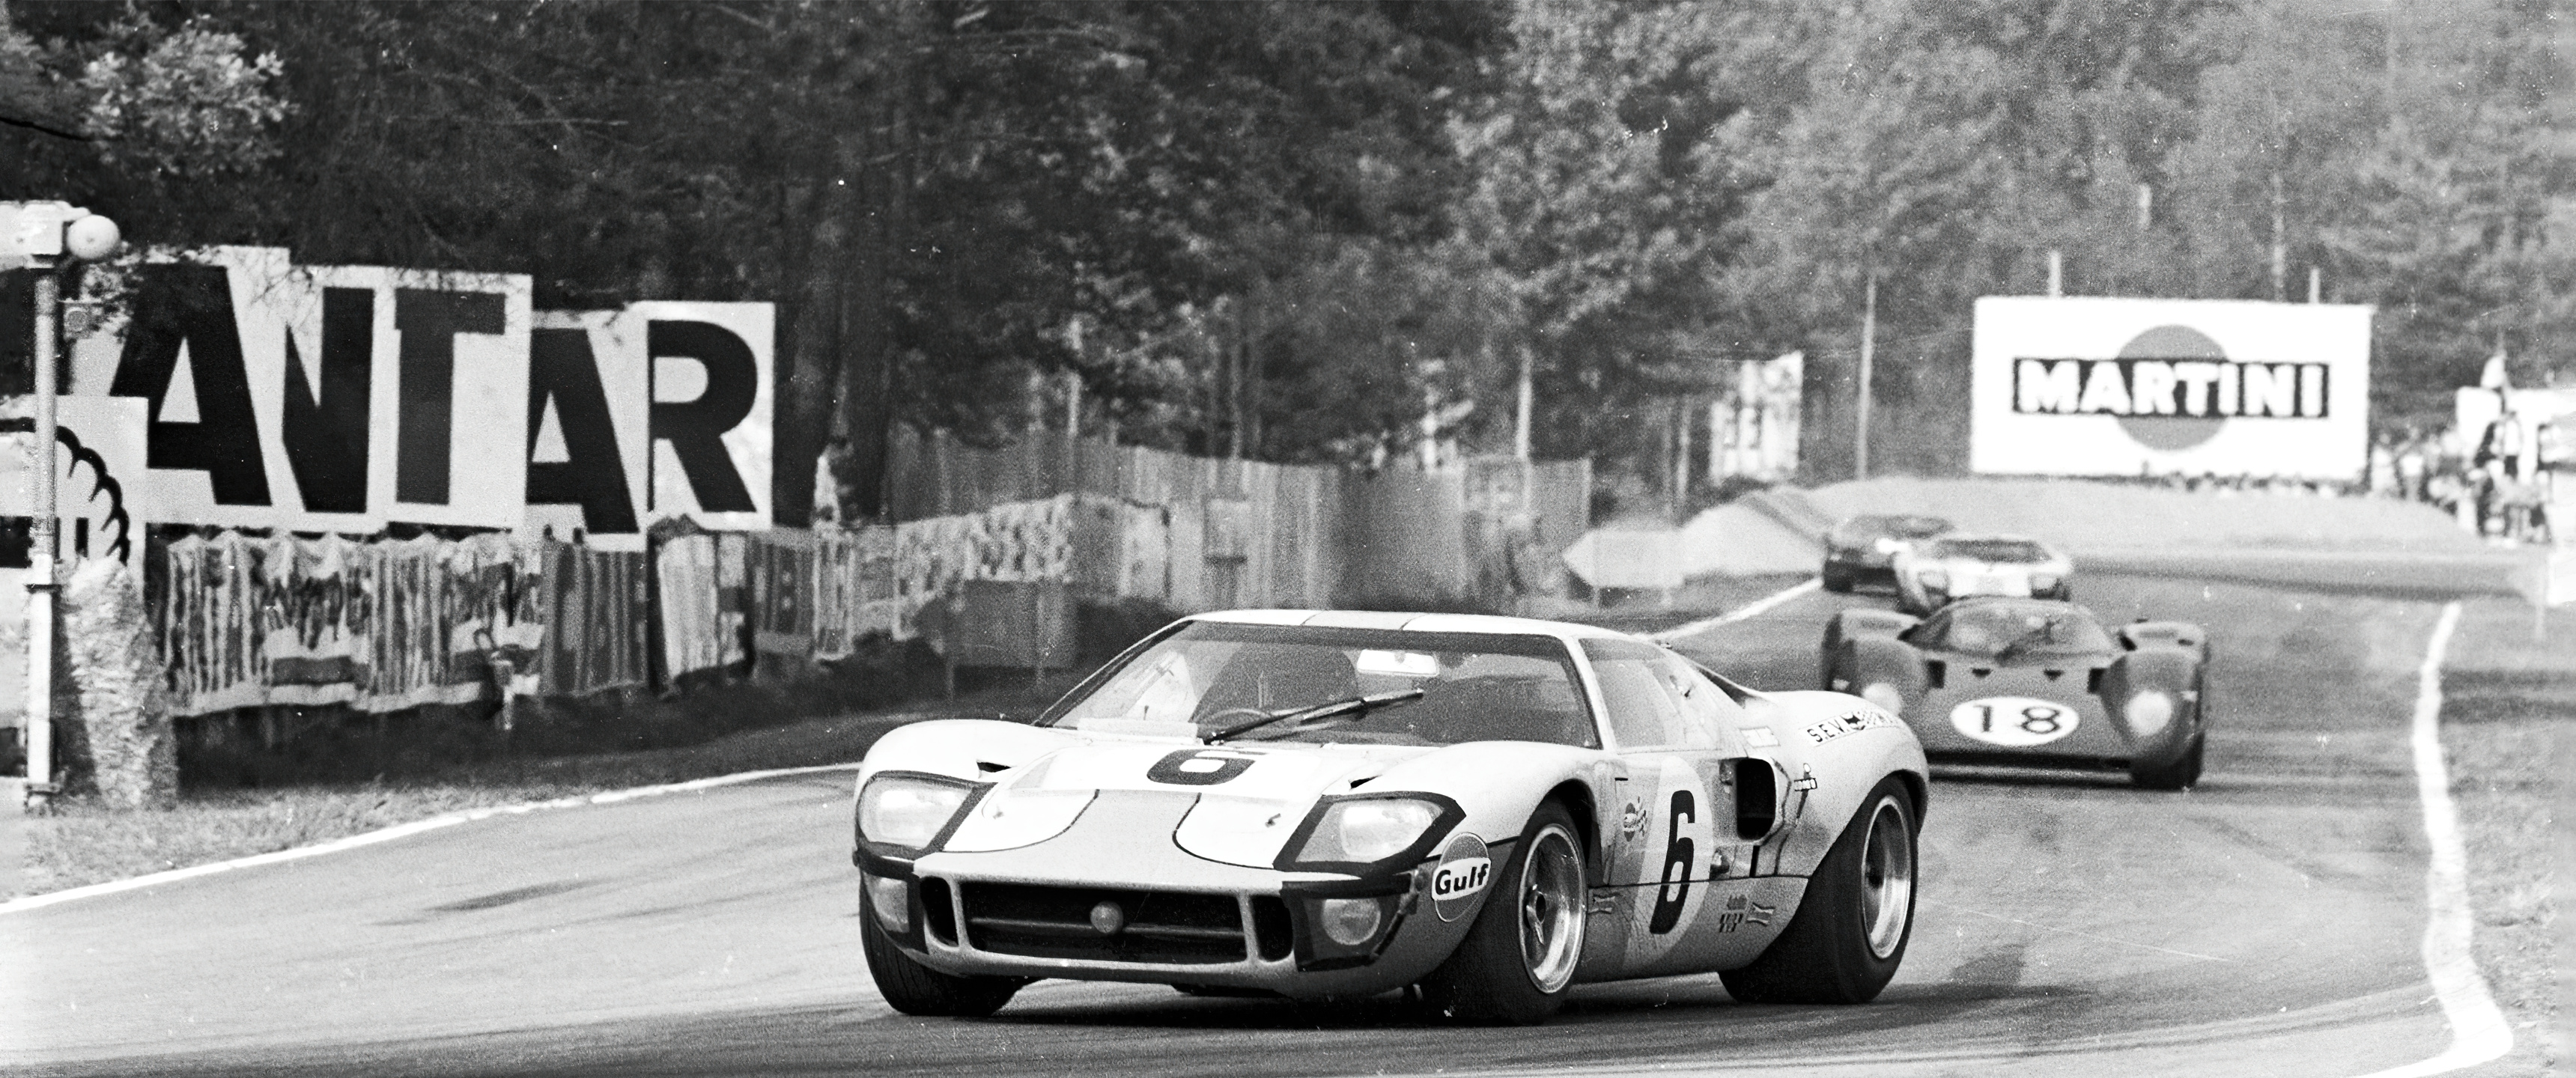 1969 24 Hours of Le Mans, Ford GT40 domination, Historic race moments, Motorsport glory, 3440x1440 Dual Screen Desktop